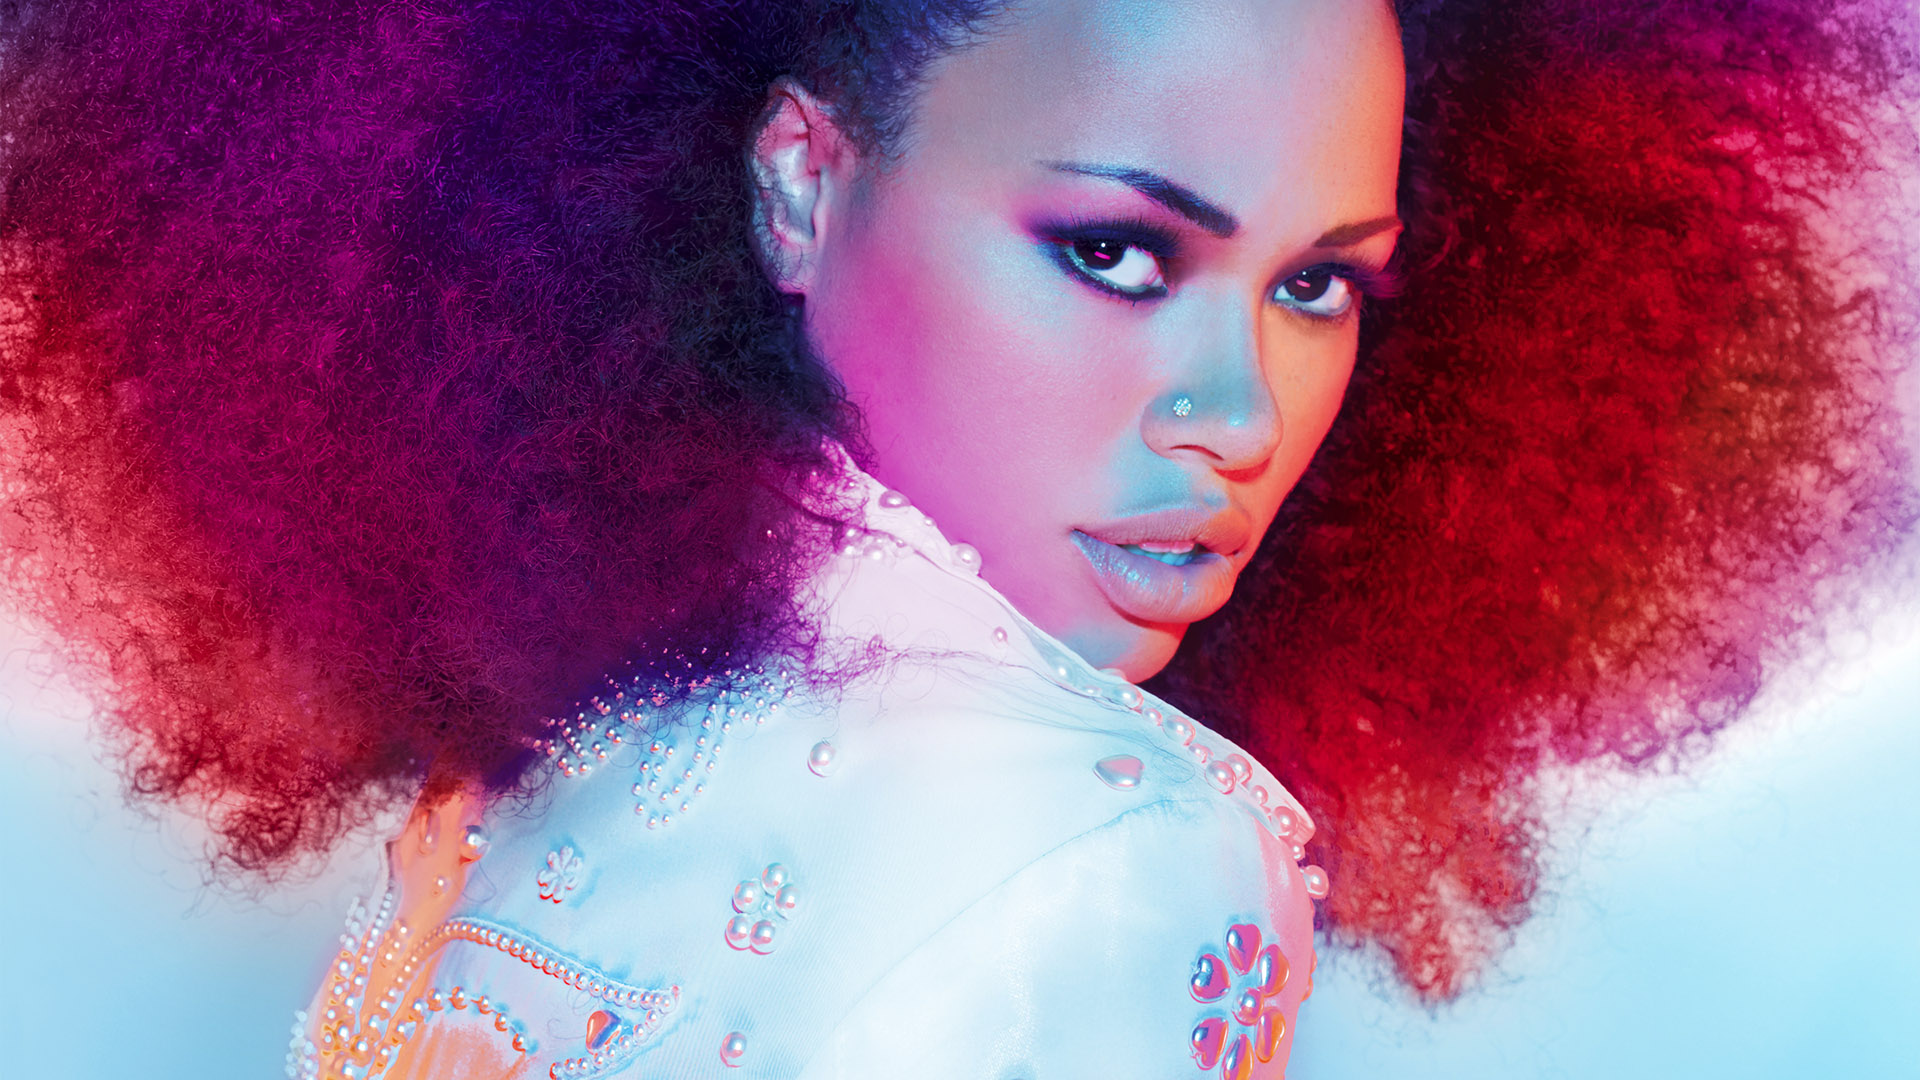  Only Wanna Give It To You (Benja Styles Remix) (Feat. J Cole) av Elle Varner 